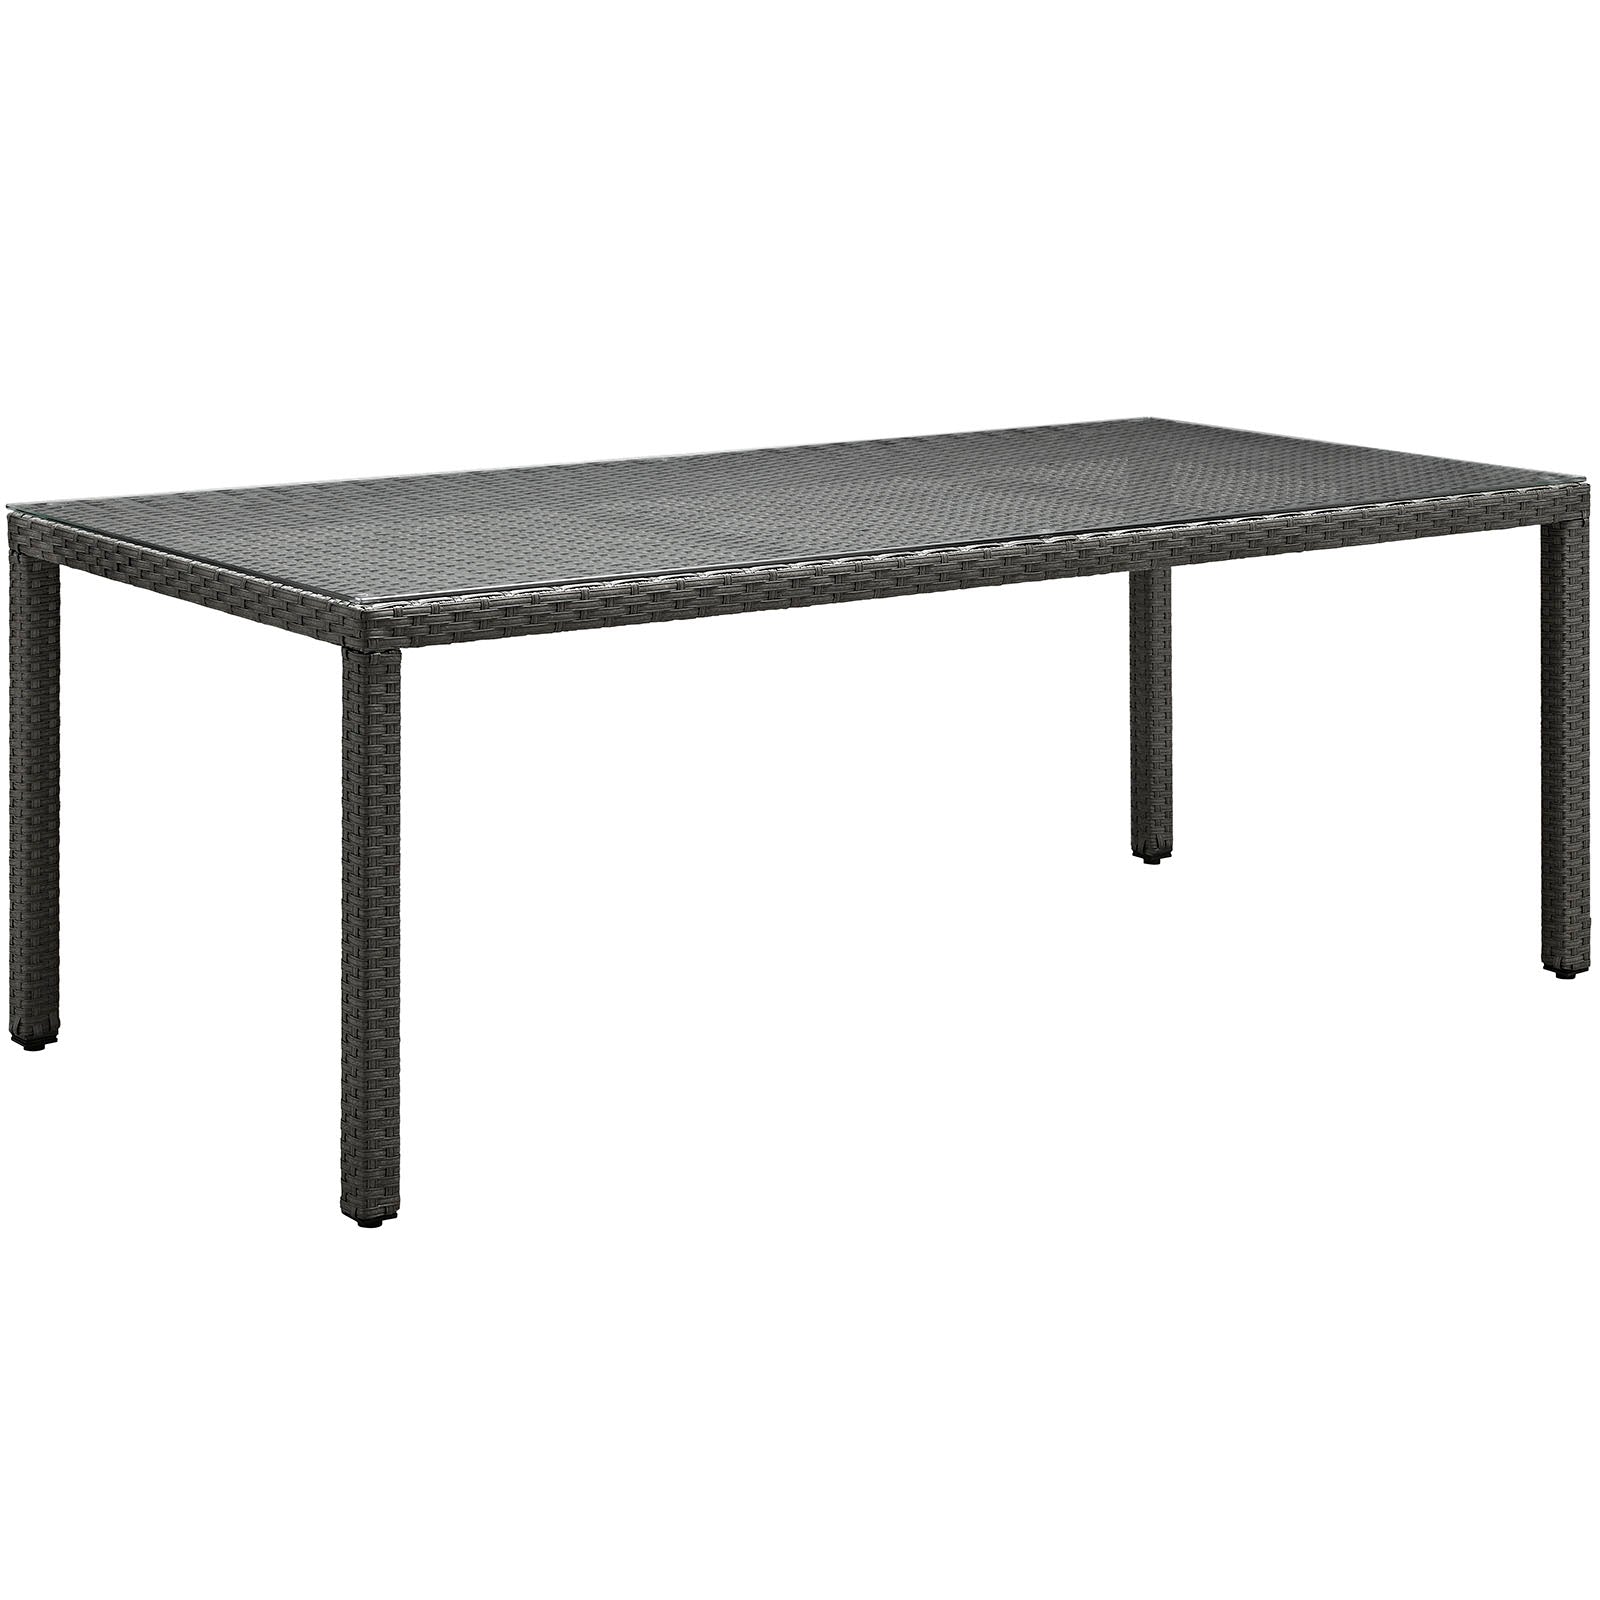 Sojourn 82" Outdoor Patio Dining Table - East Shore Modern Home Furnishings